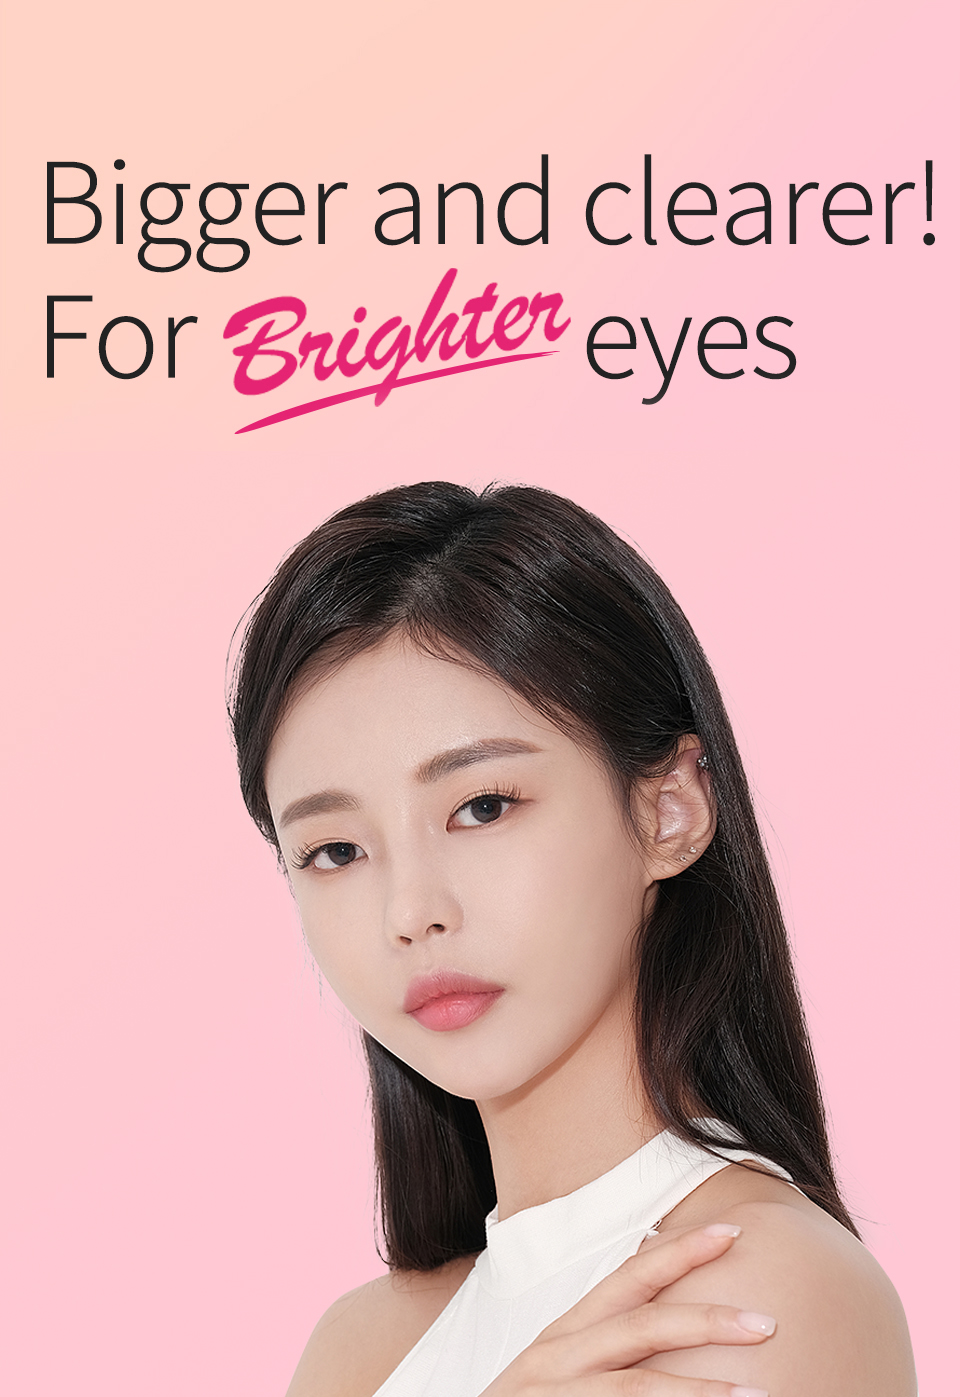 Bigger and clearer! For Brighter eyes